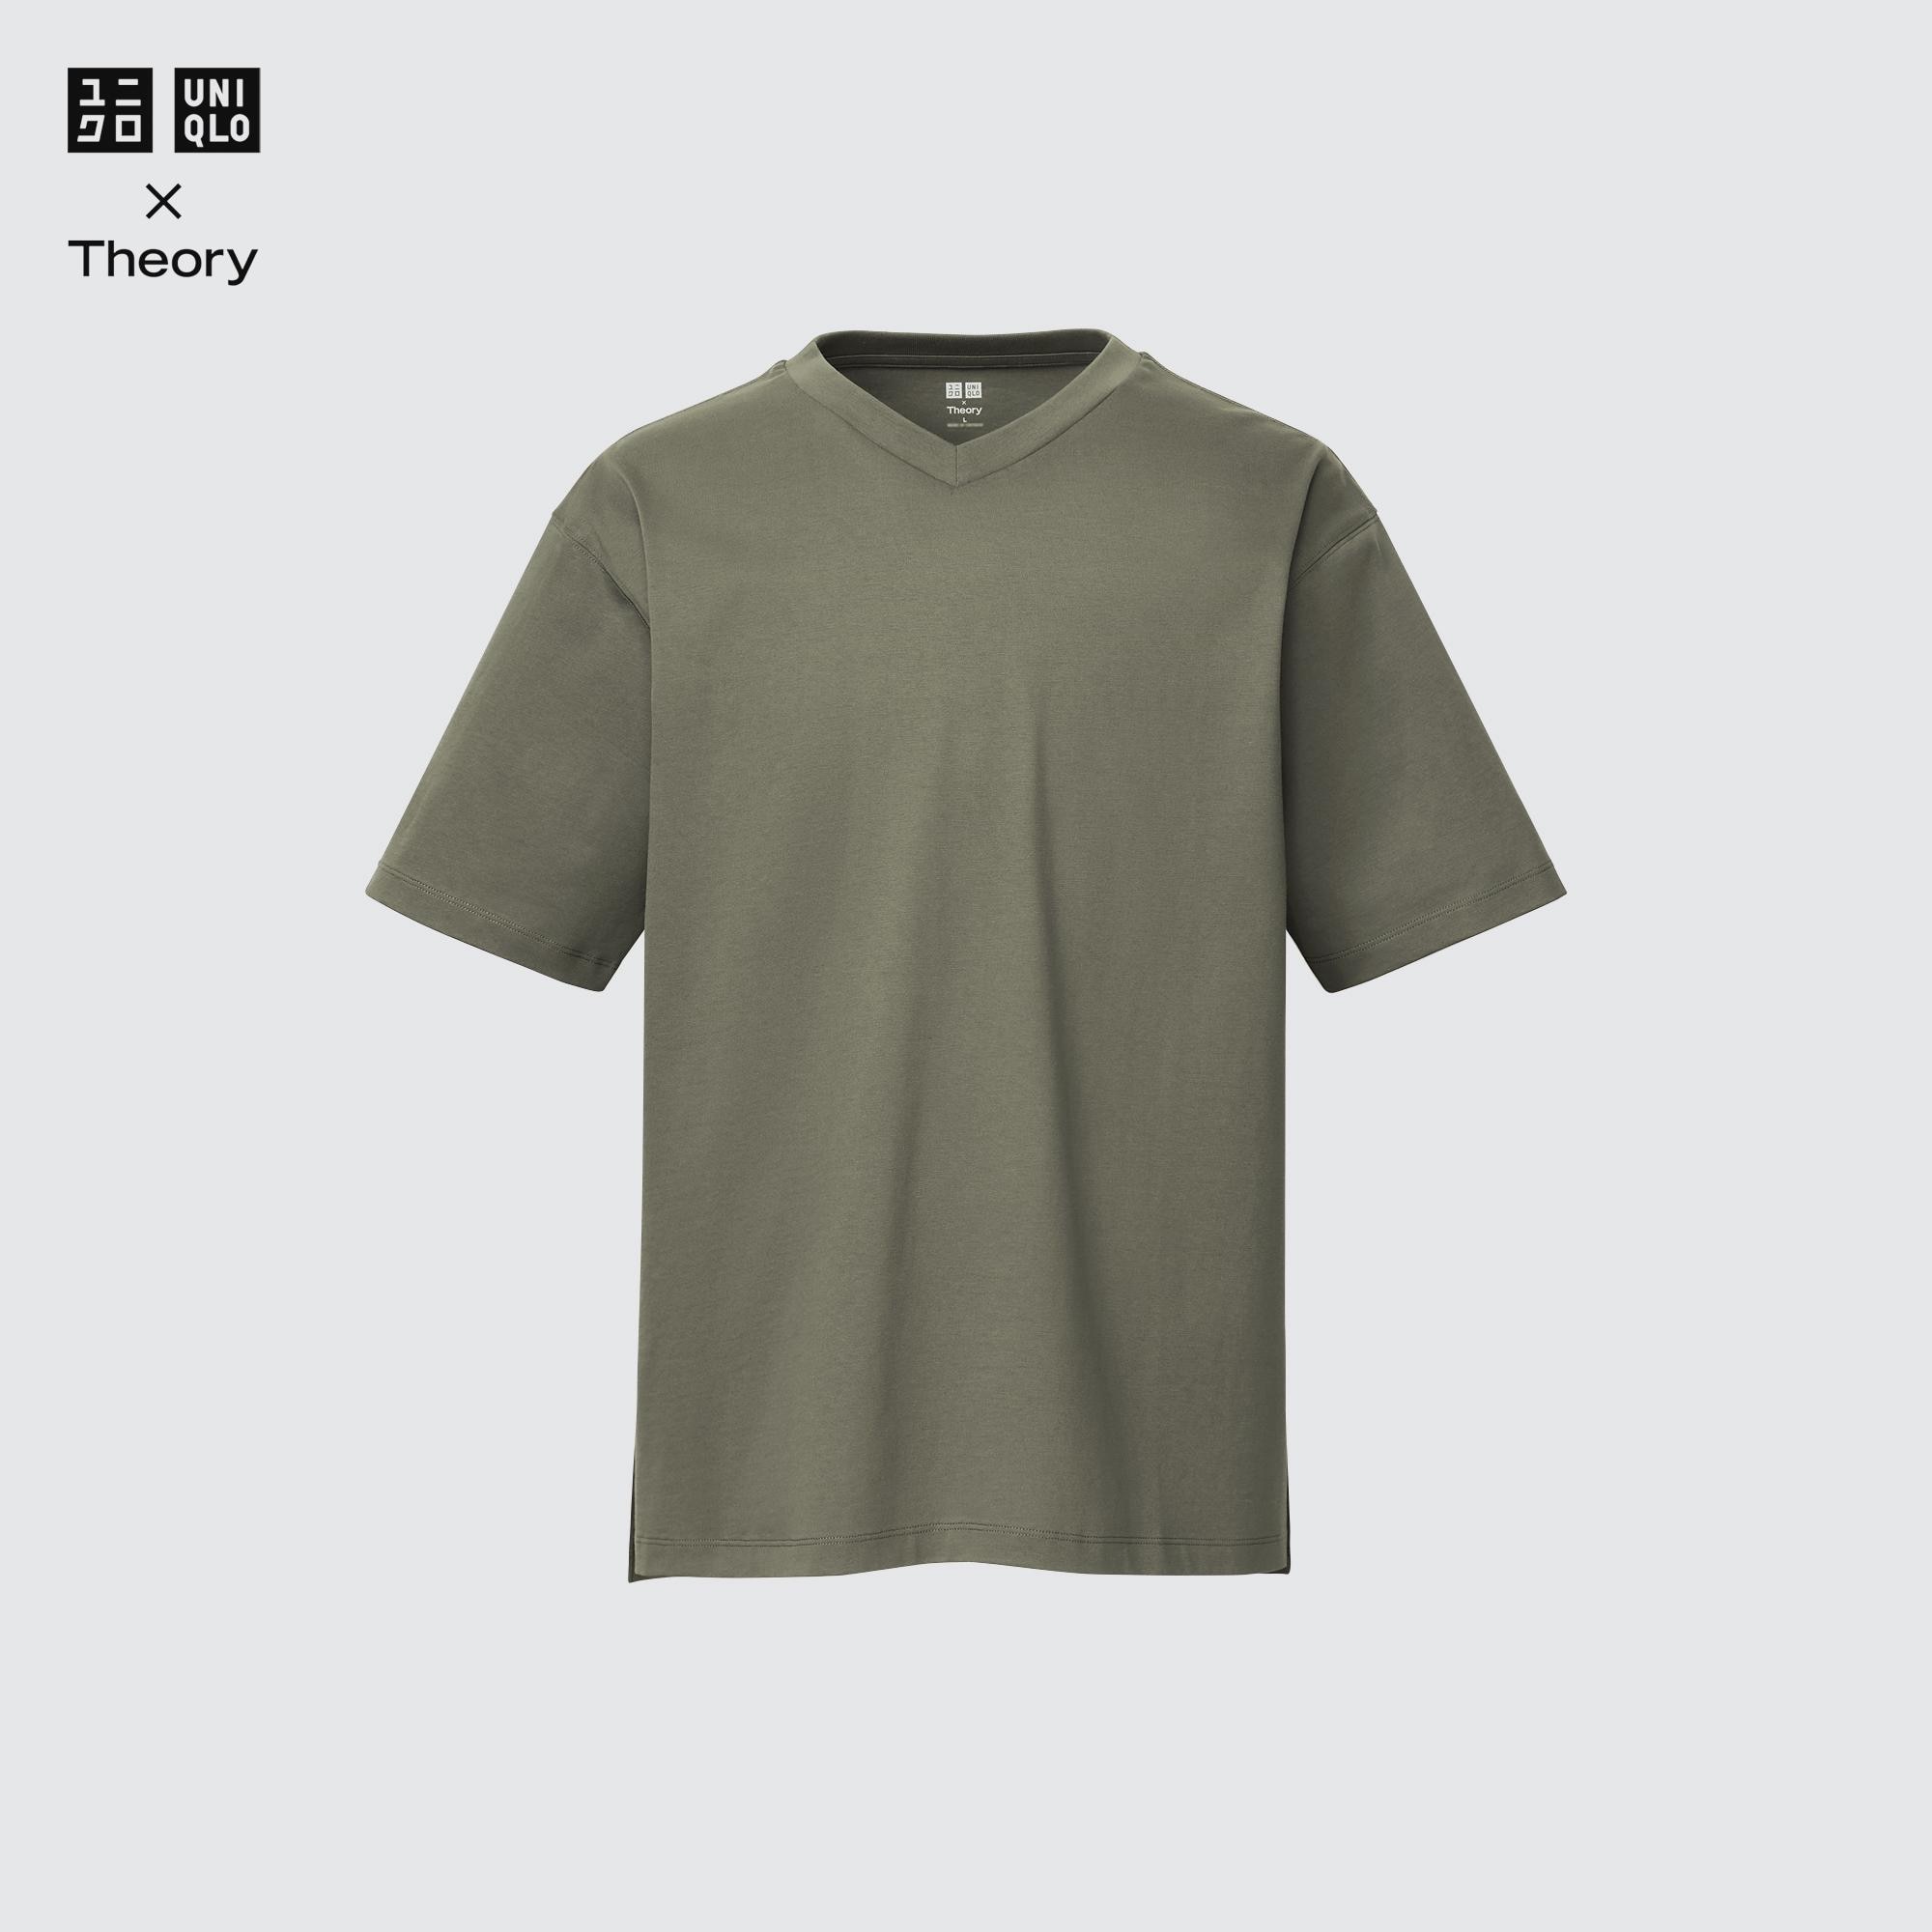 UNIQLO X THEORY RELAXED FIT V-NECK T-SHIRT